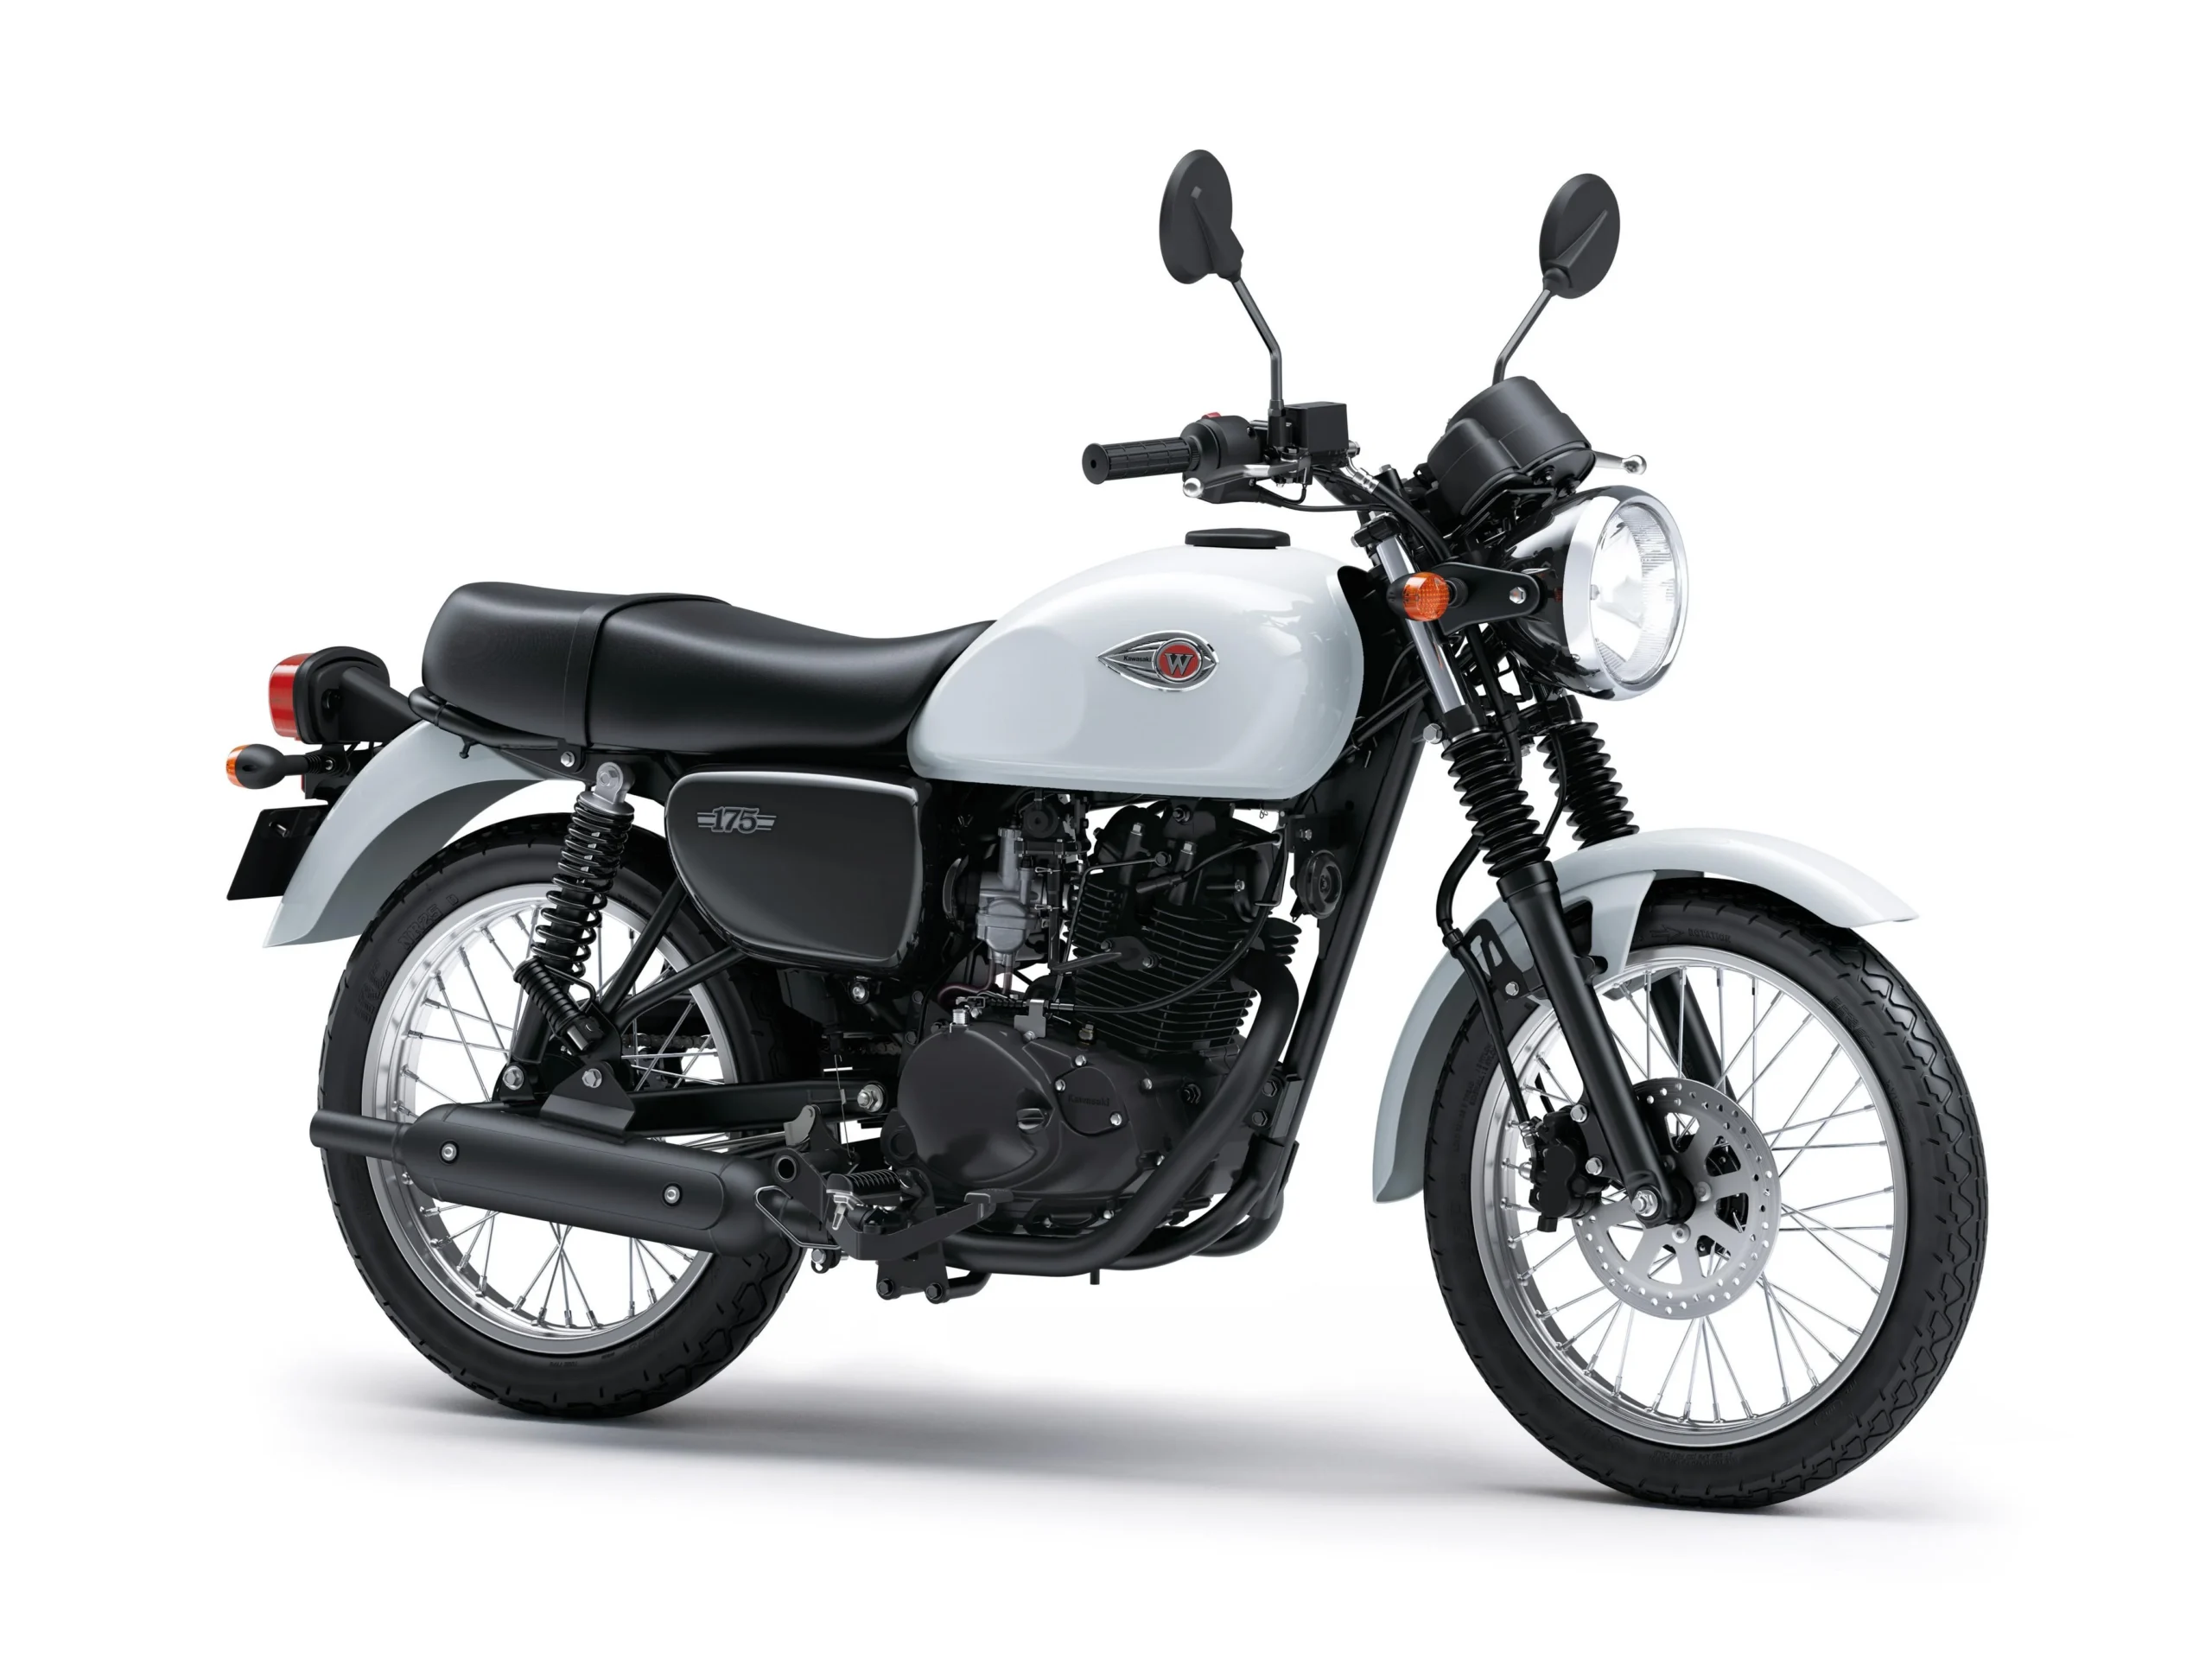 Read more about the article Kawasaki W175 Price in India, Engine, Features and Design.